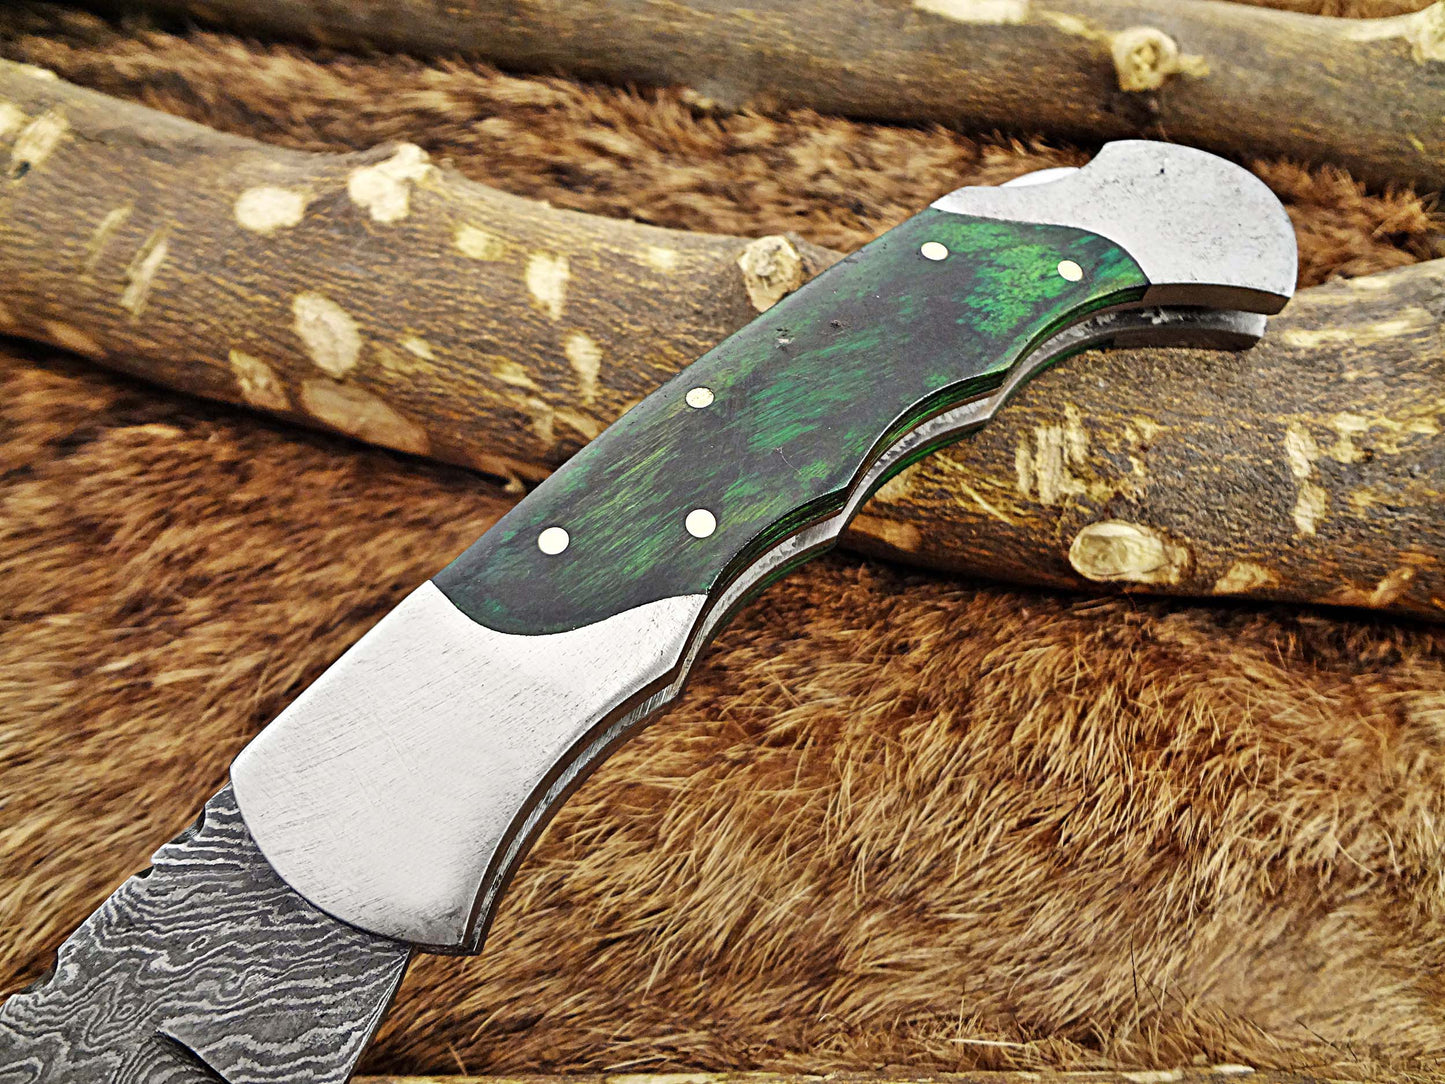 8" long Damascus steel Folding Knife, Walnut wood with Steel bolster scale, custom made 3.5" Hand Forged blade cow hide leather sheath